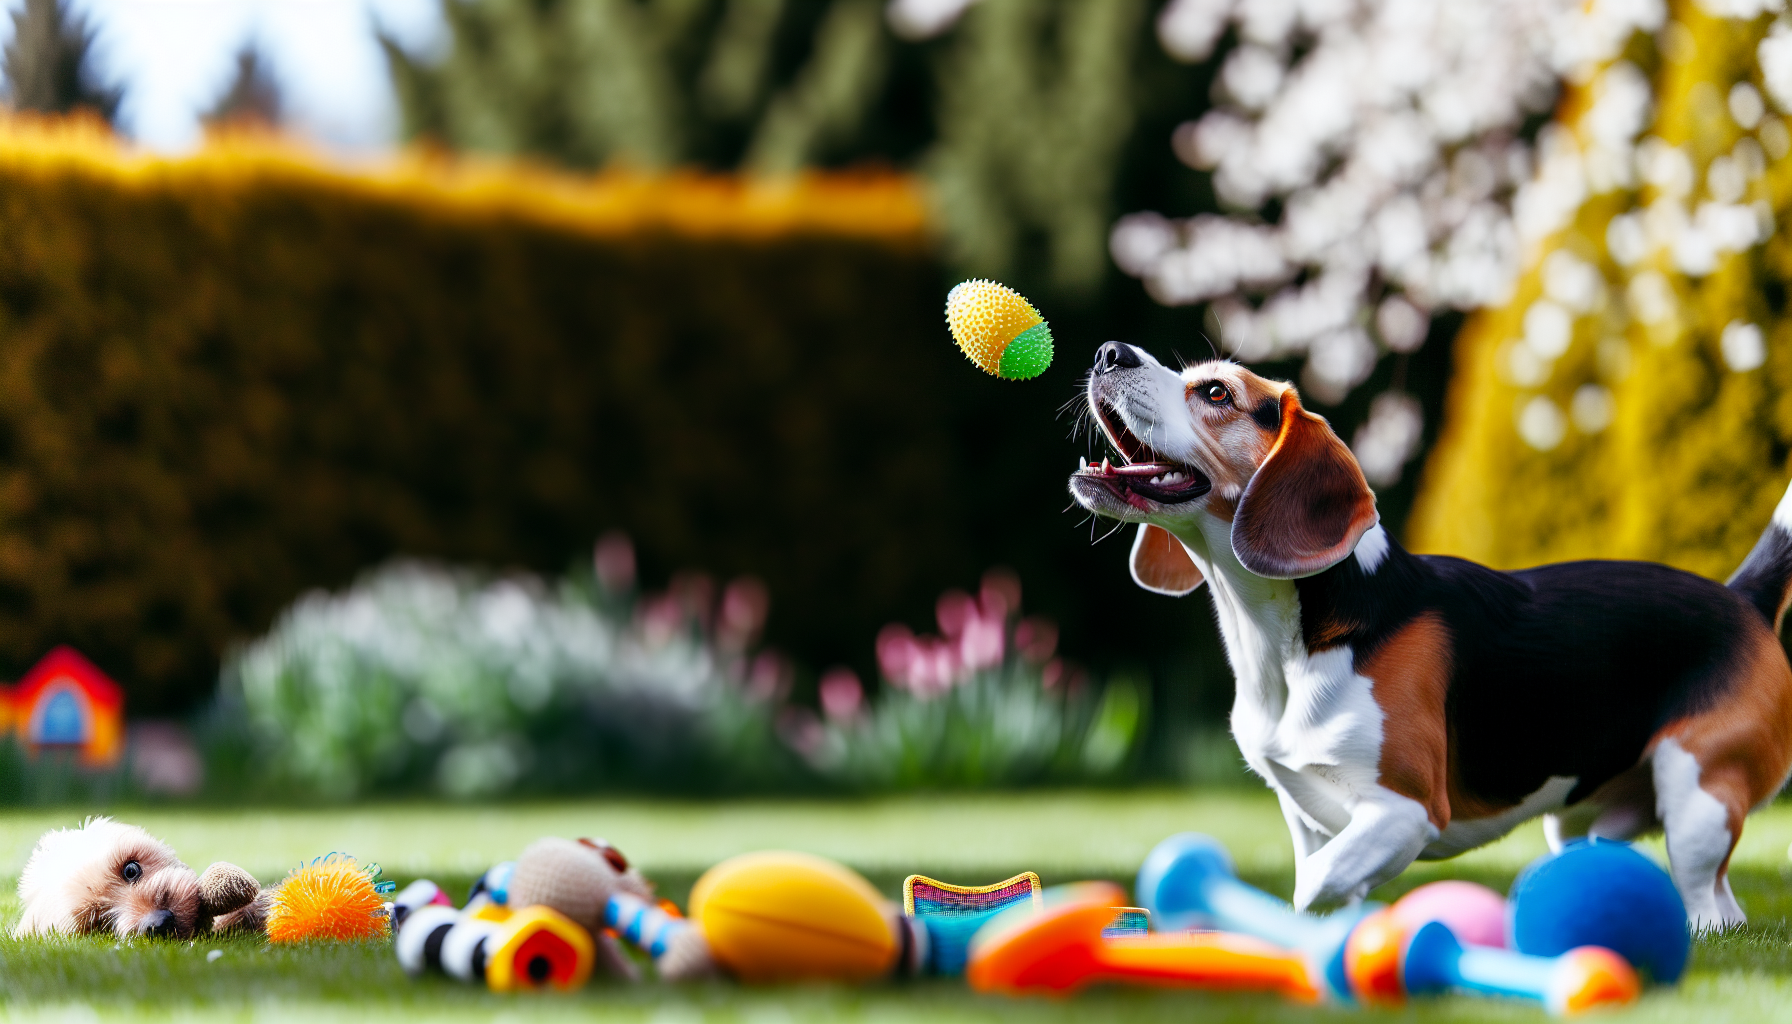 Beagle playing with toys